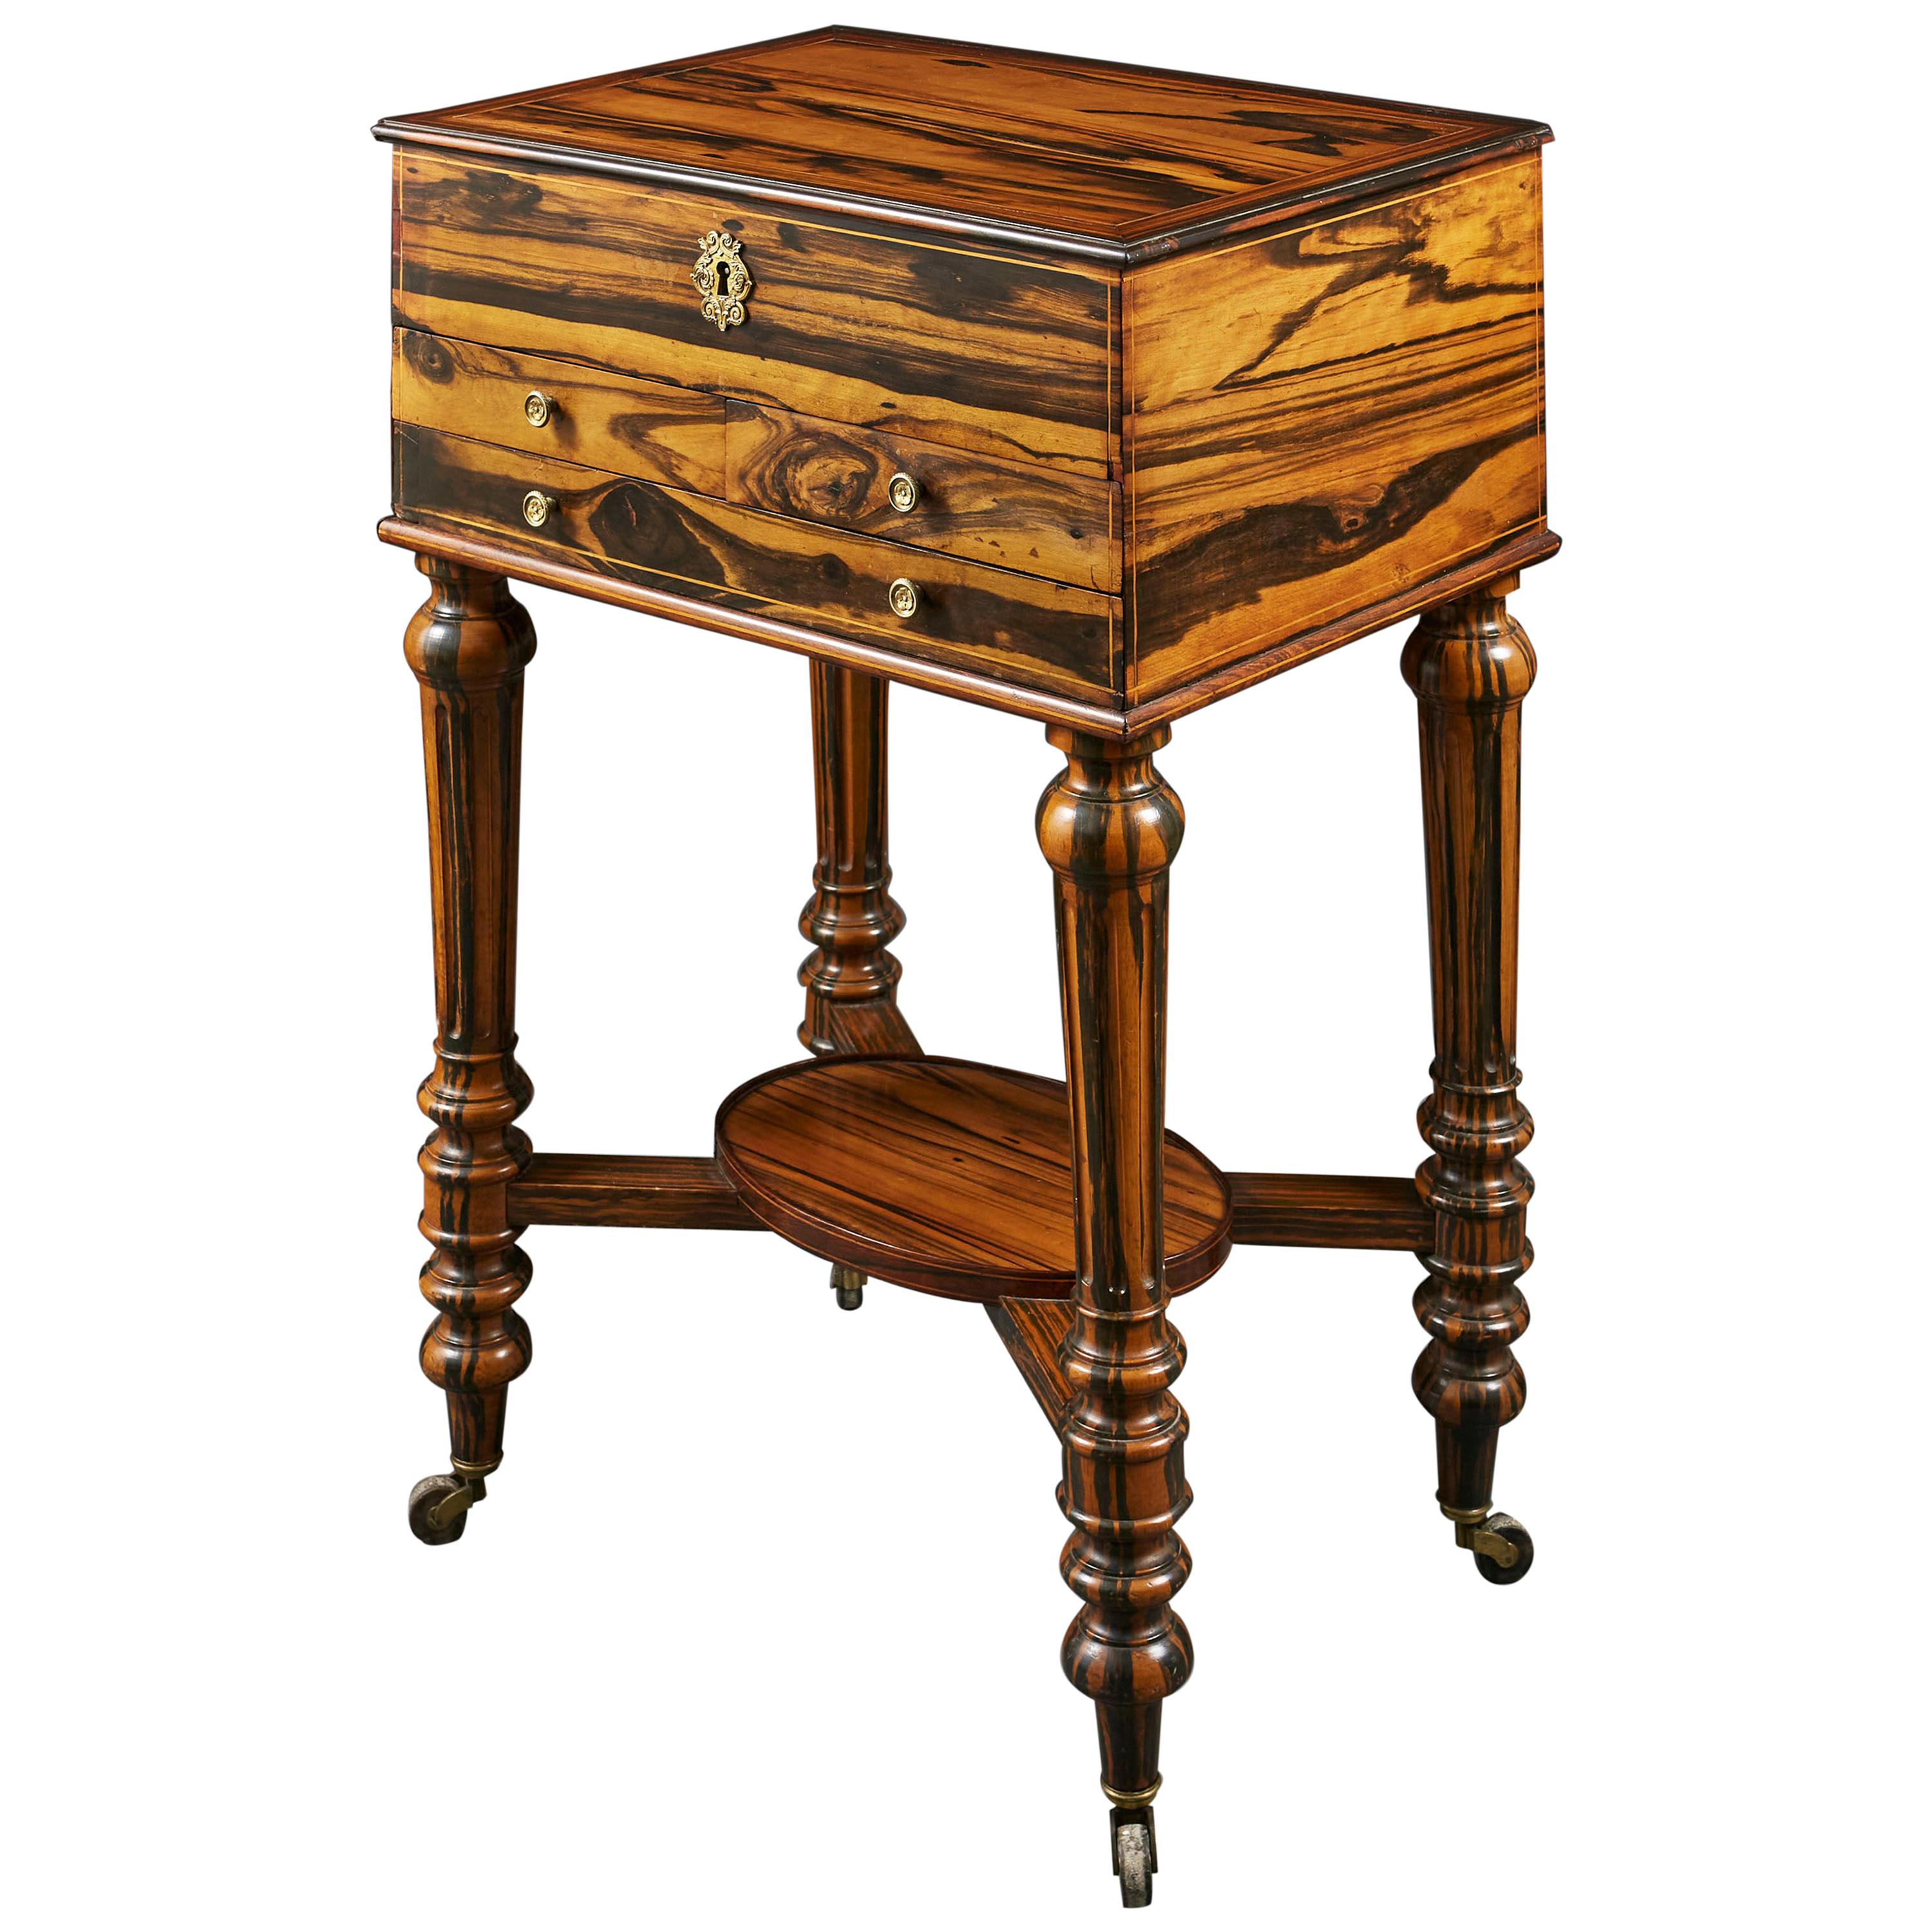 A French Mid 19th Century Coromandel Wood Bedside Table